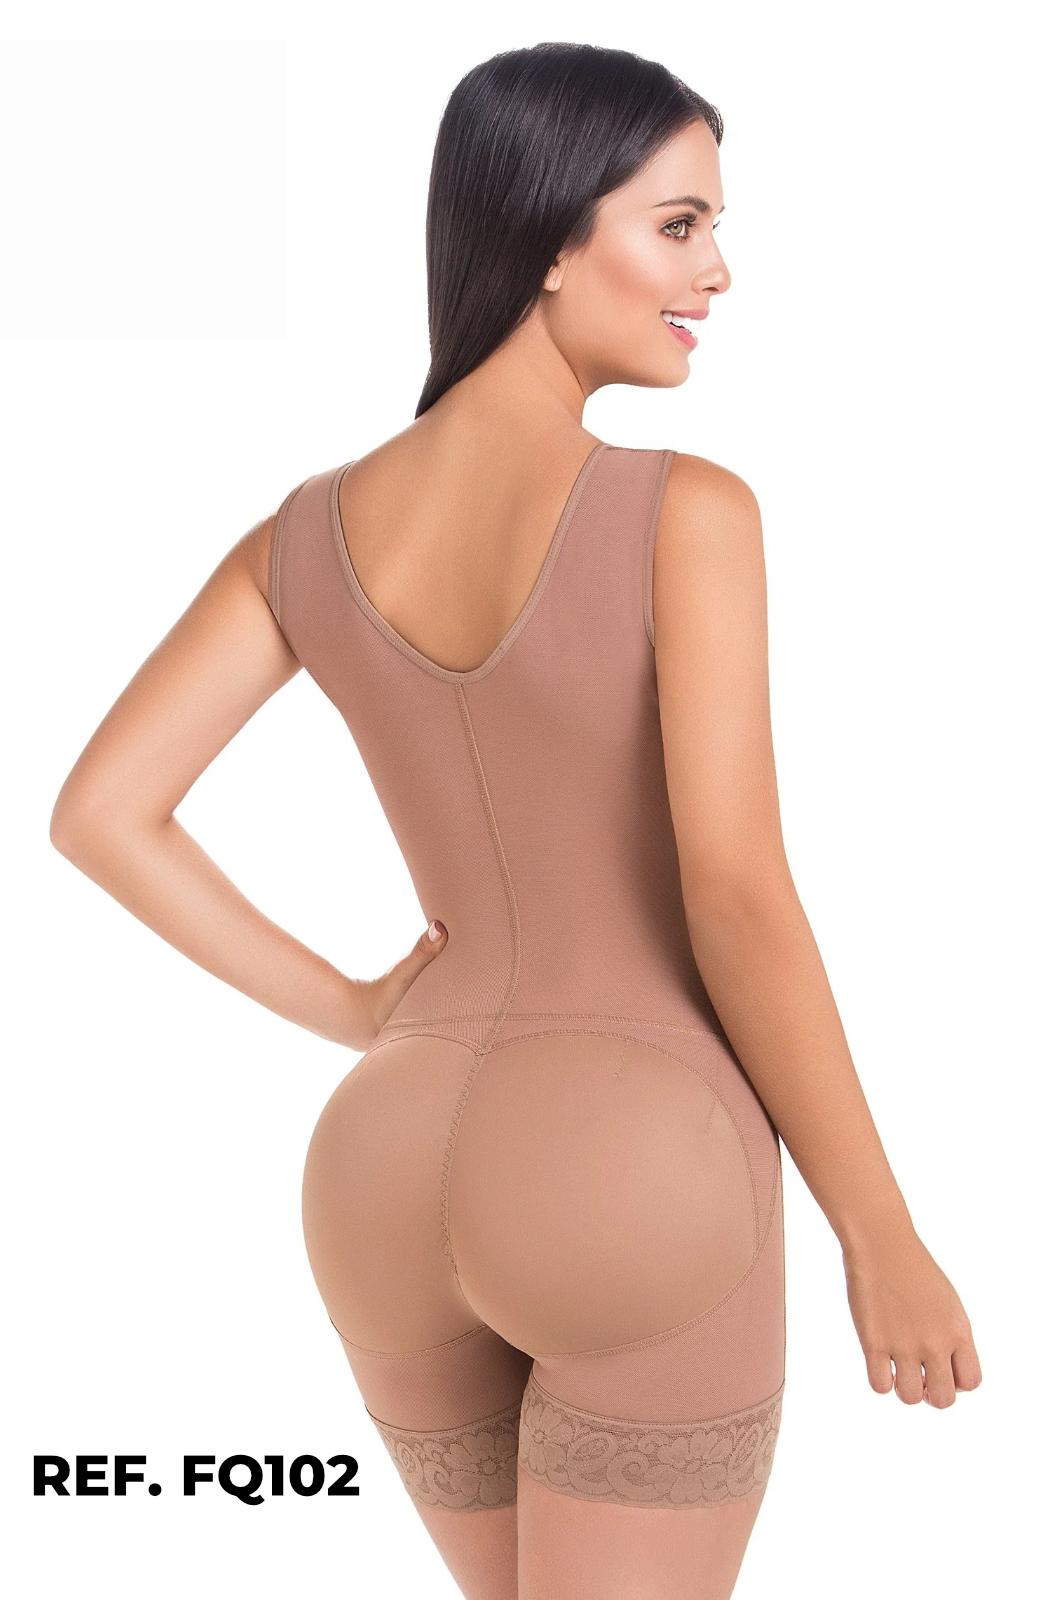 Short Girdle with Post-Surgical Butt Lift Bra